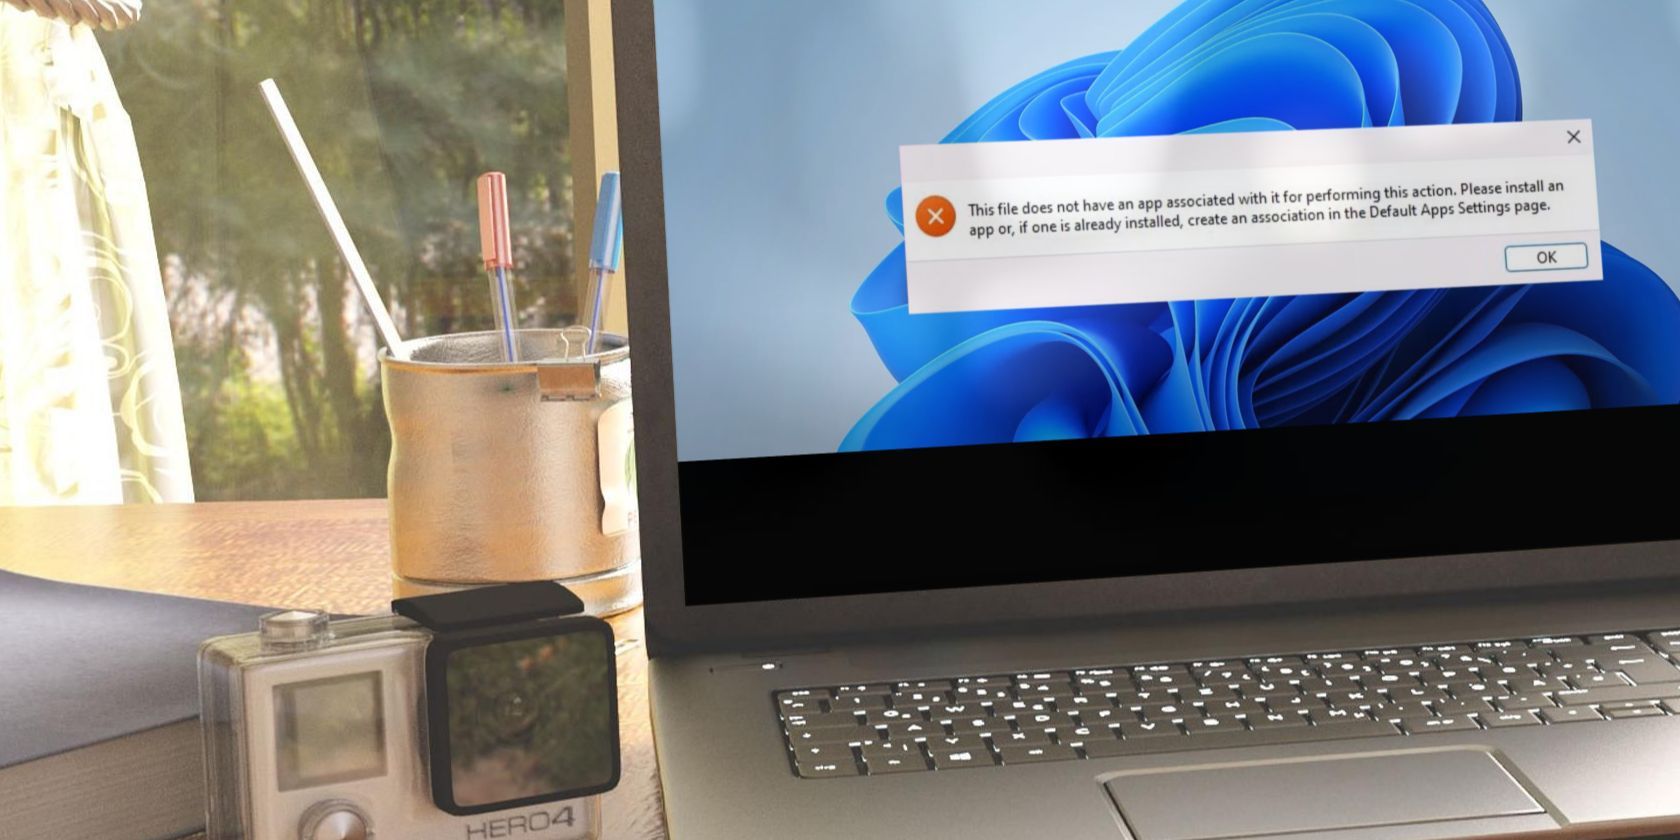 Windows Laptop Showing an Error Placed on a Table Close to a Window